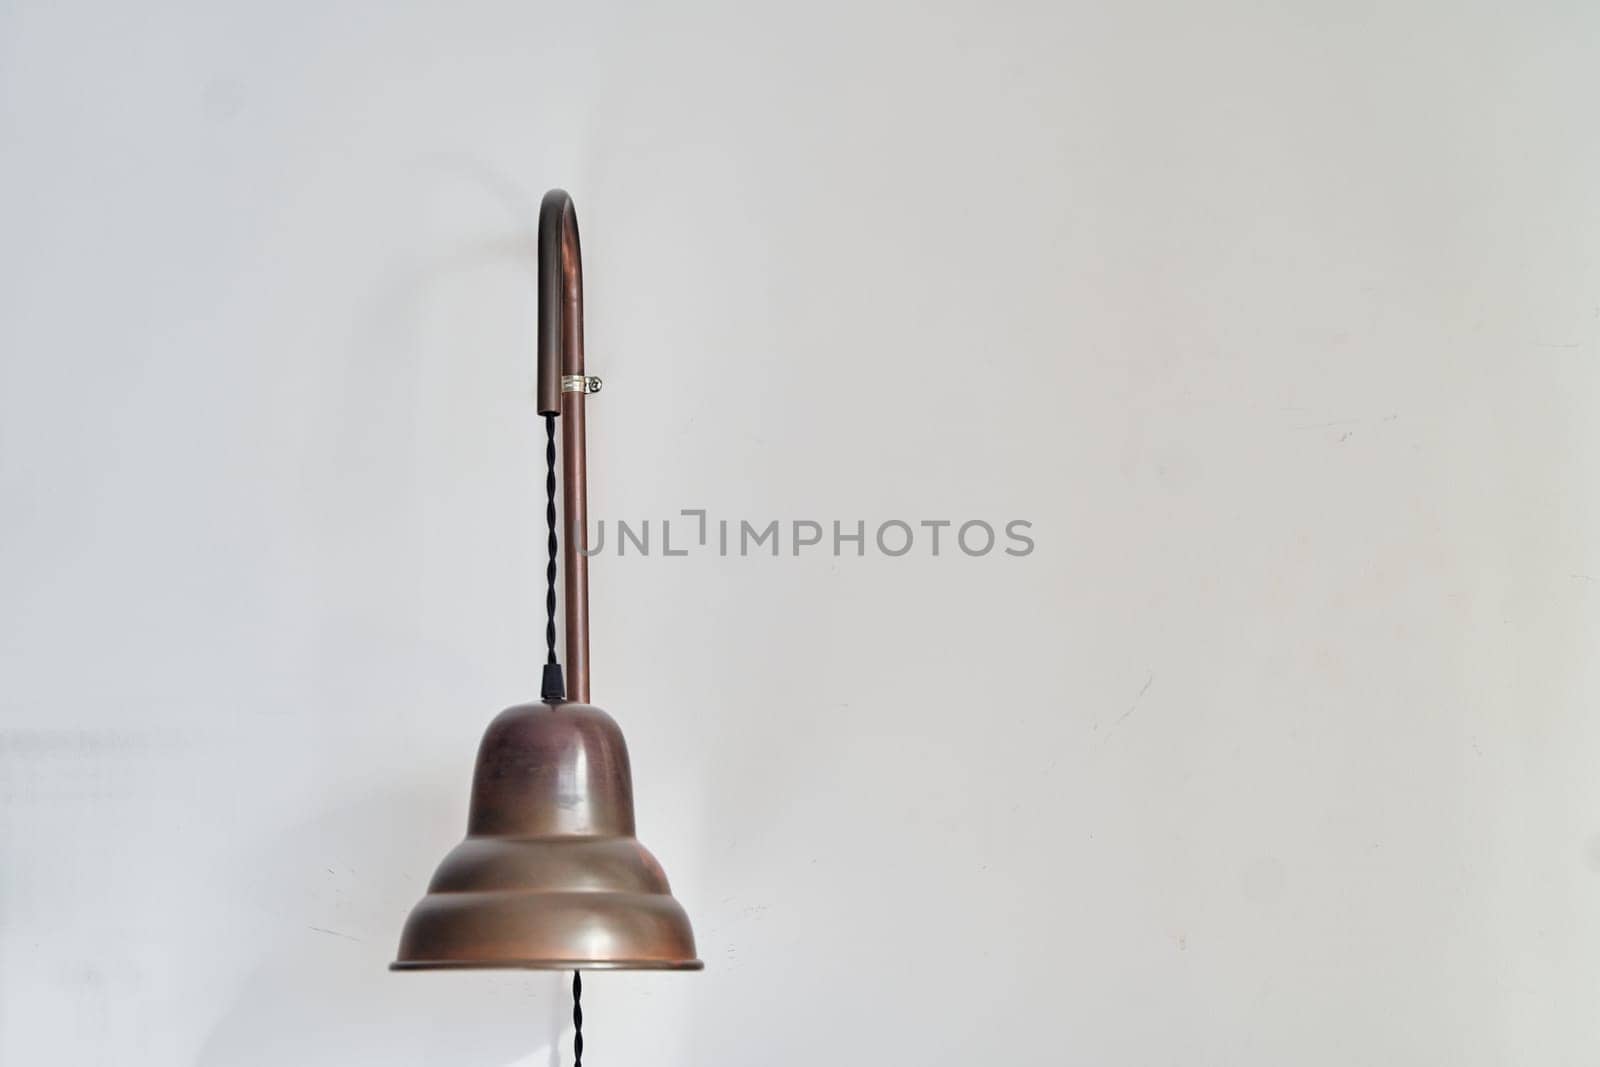 A bronze lamp with a steel finial is suspended from a wooden pole on a white wall, creating a striking still life composition